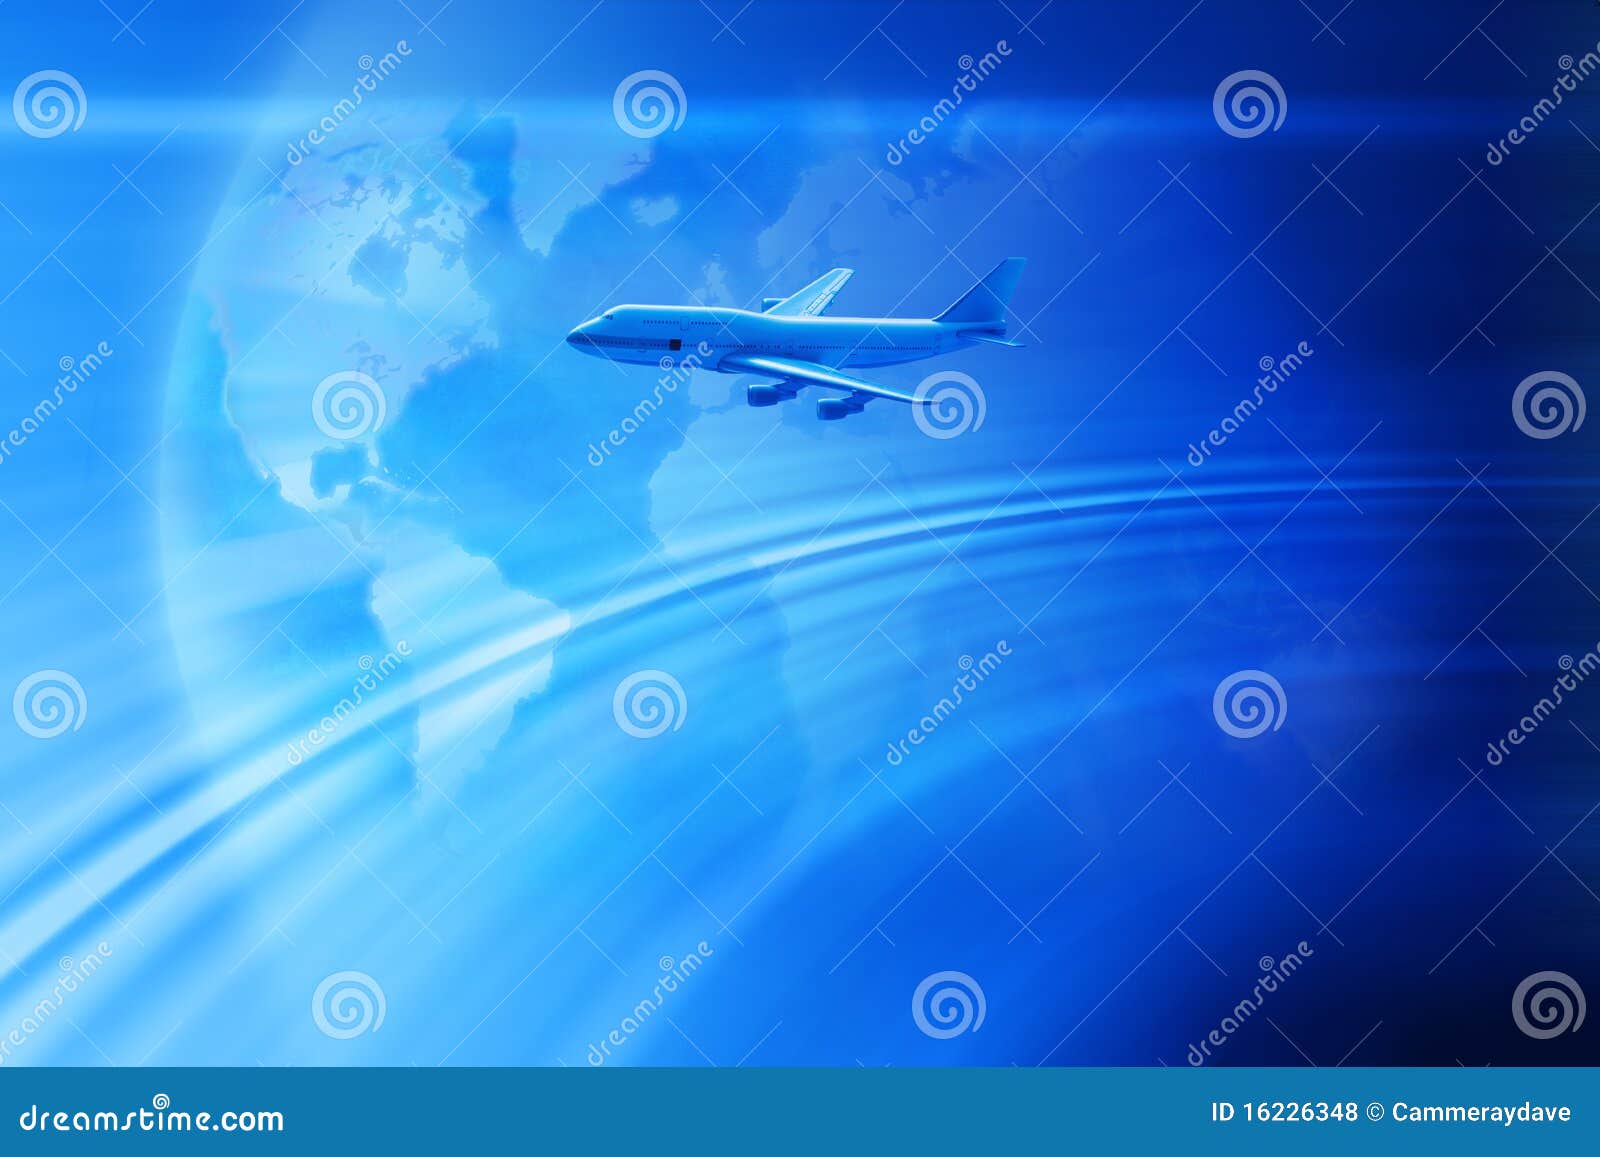 global airplane travel business background